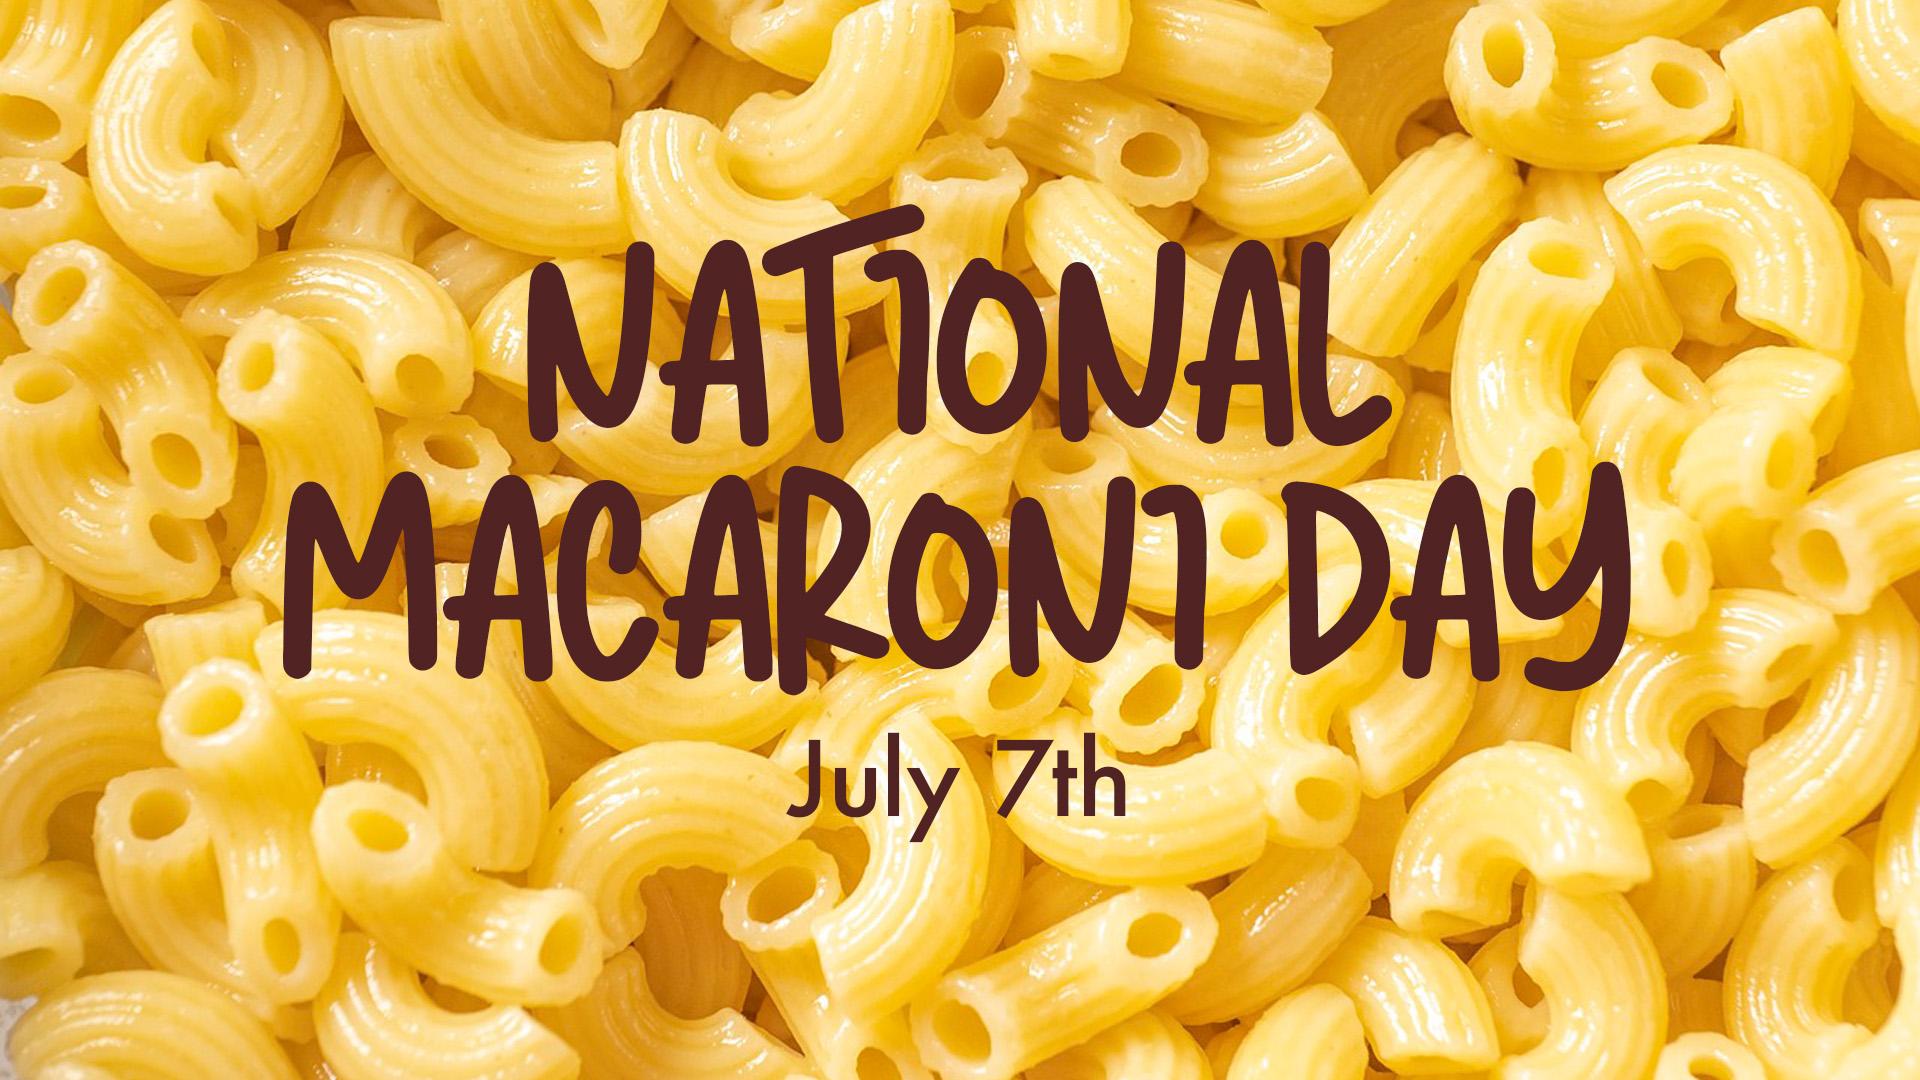 Zoomed up photo of yellow macaroni noodles. Text is in a dark brown curvy font spelling out National Macaroni Day July 7th.